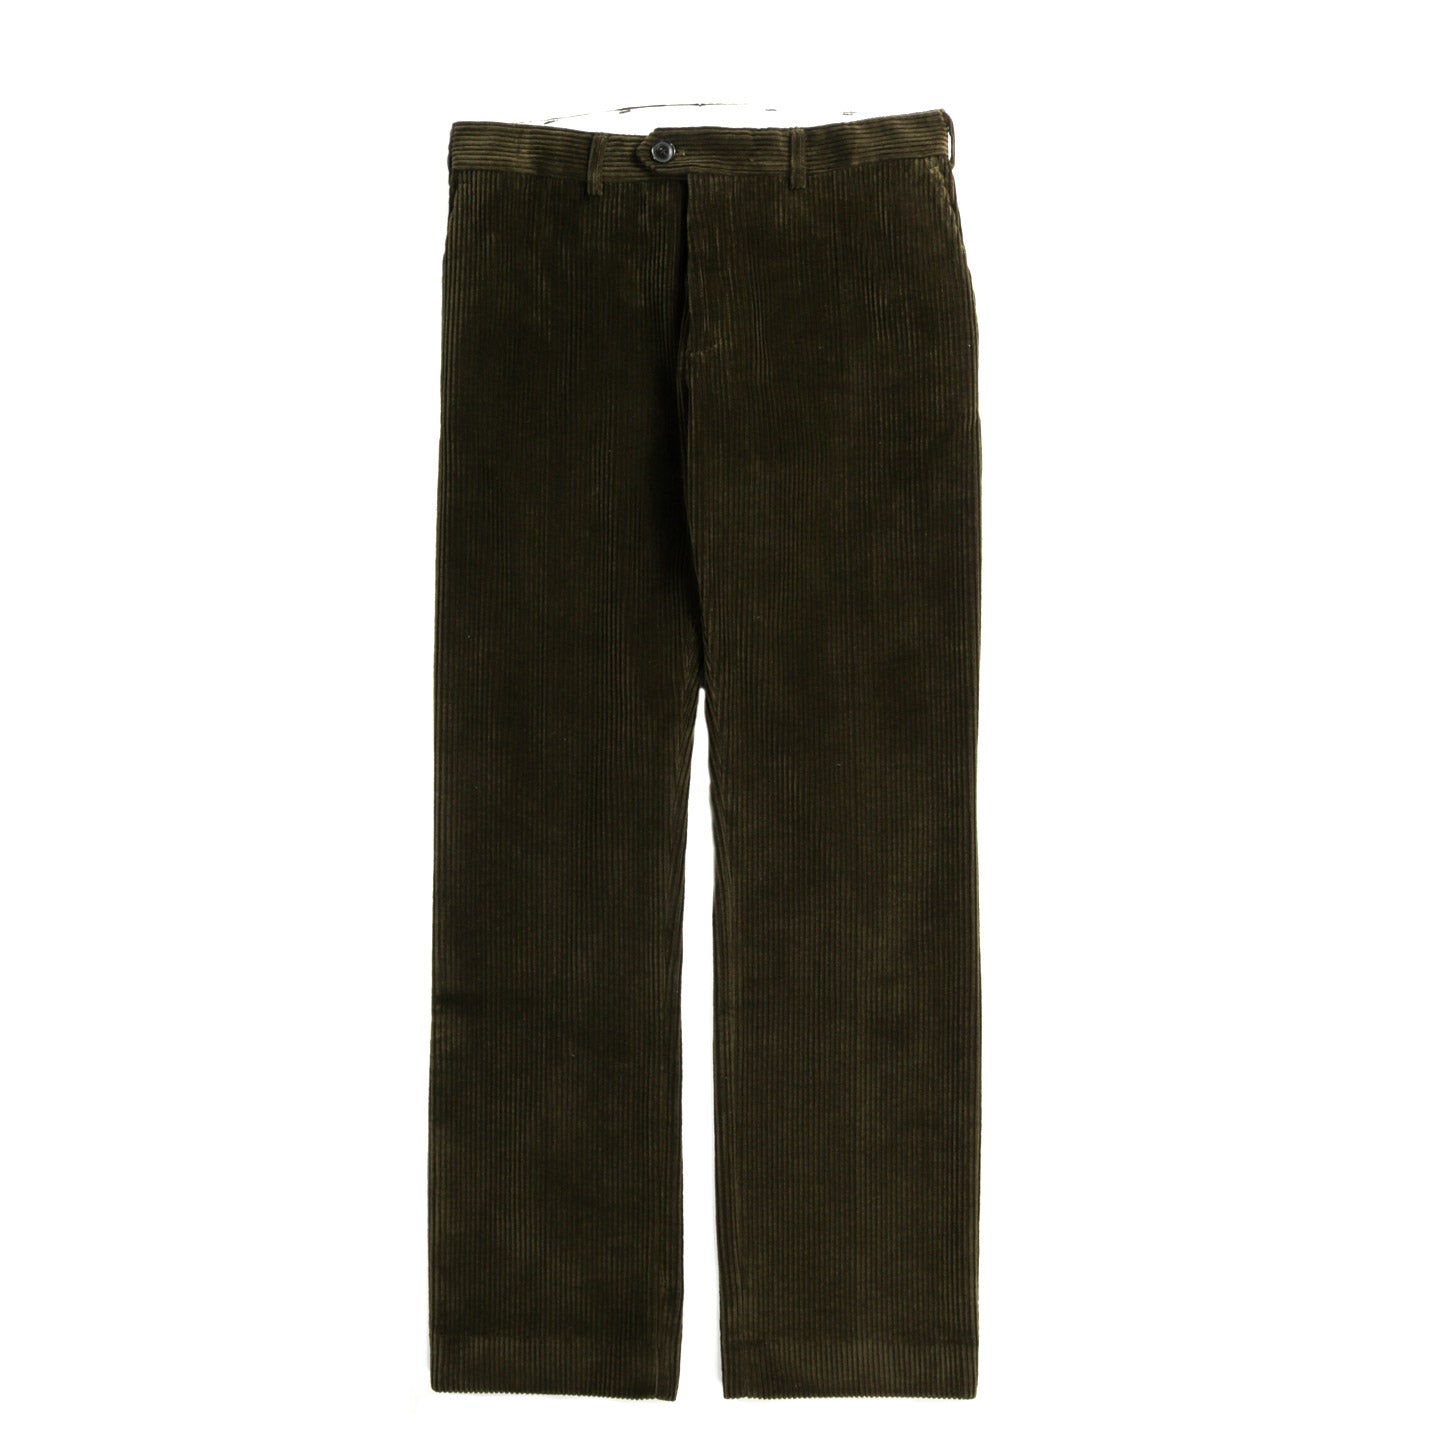 A KIND OF GUISE RELAXED TAILORED TROUSERS OLIVE CORDUROY